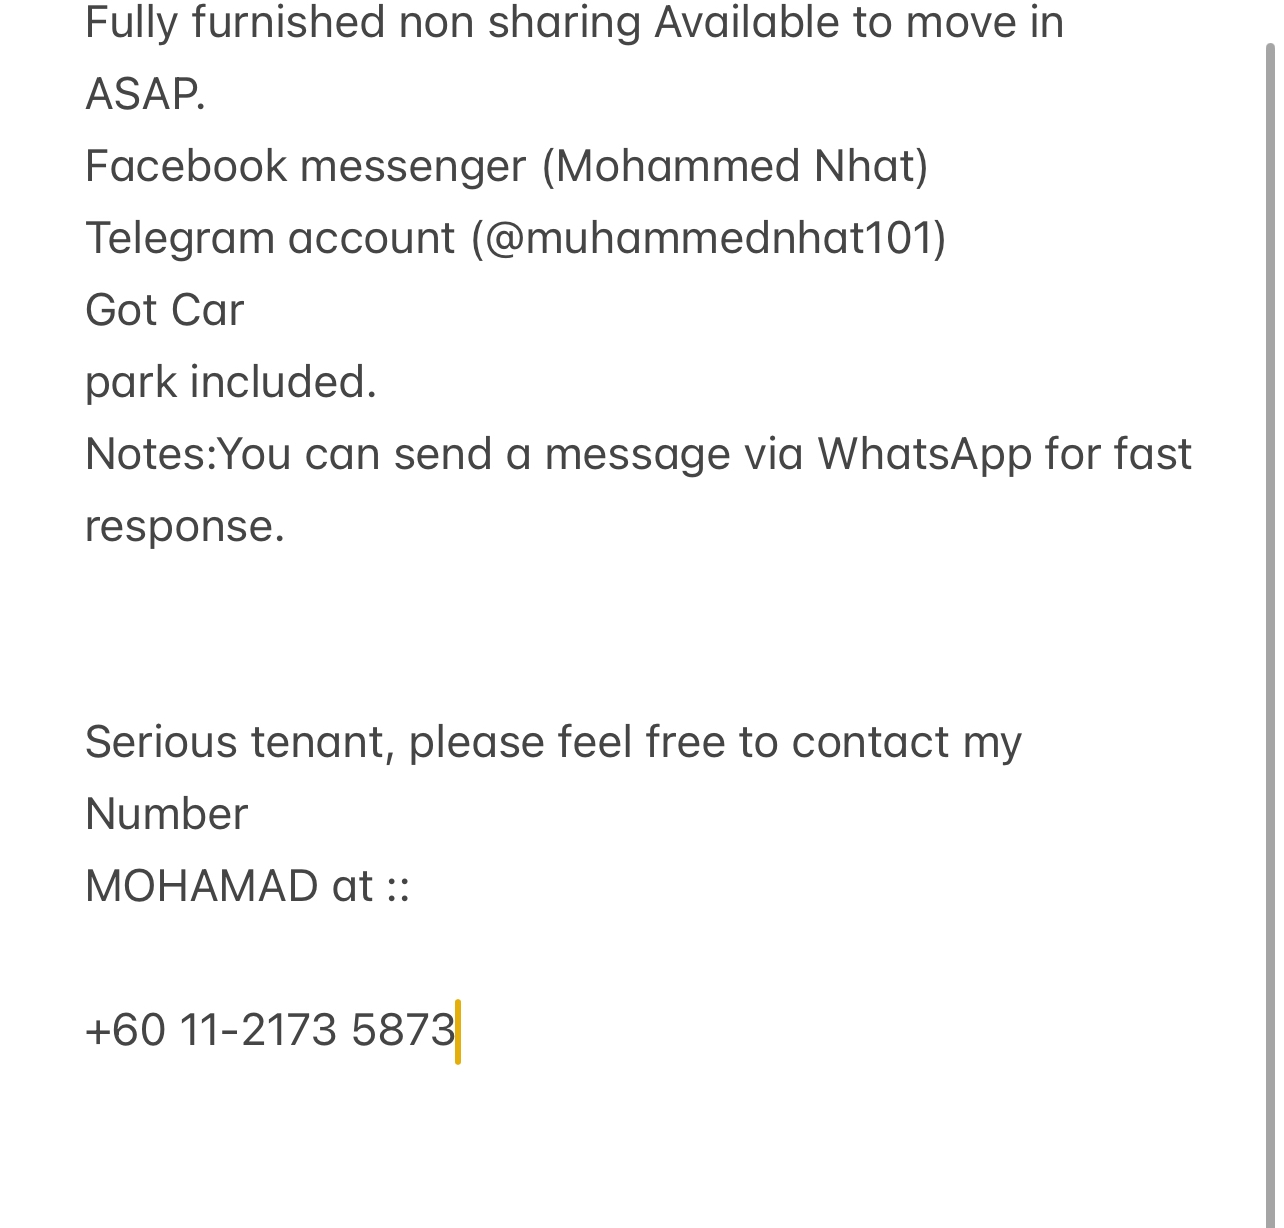 room for rent, master room, jalan kuching, Send the owner a message on WhatsApp/facebook if you want to RENT the unit facebook (Mohammed Nhat)&Telegram(@muhammednhat101) Fully furnished non sharing :(comfortable)